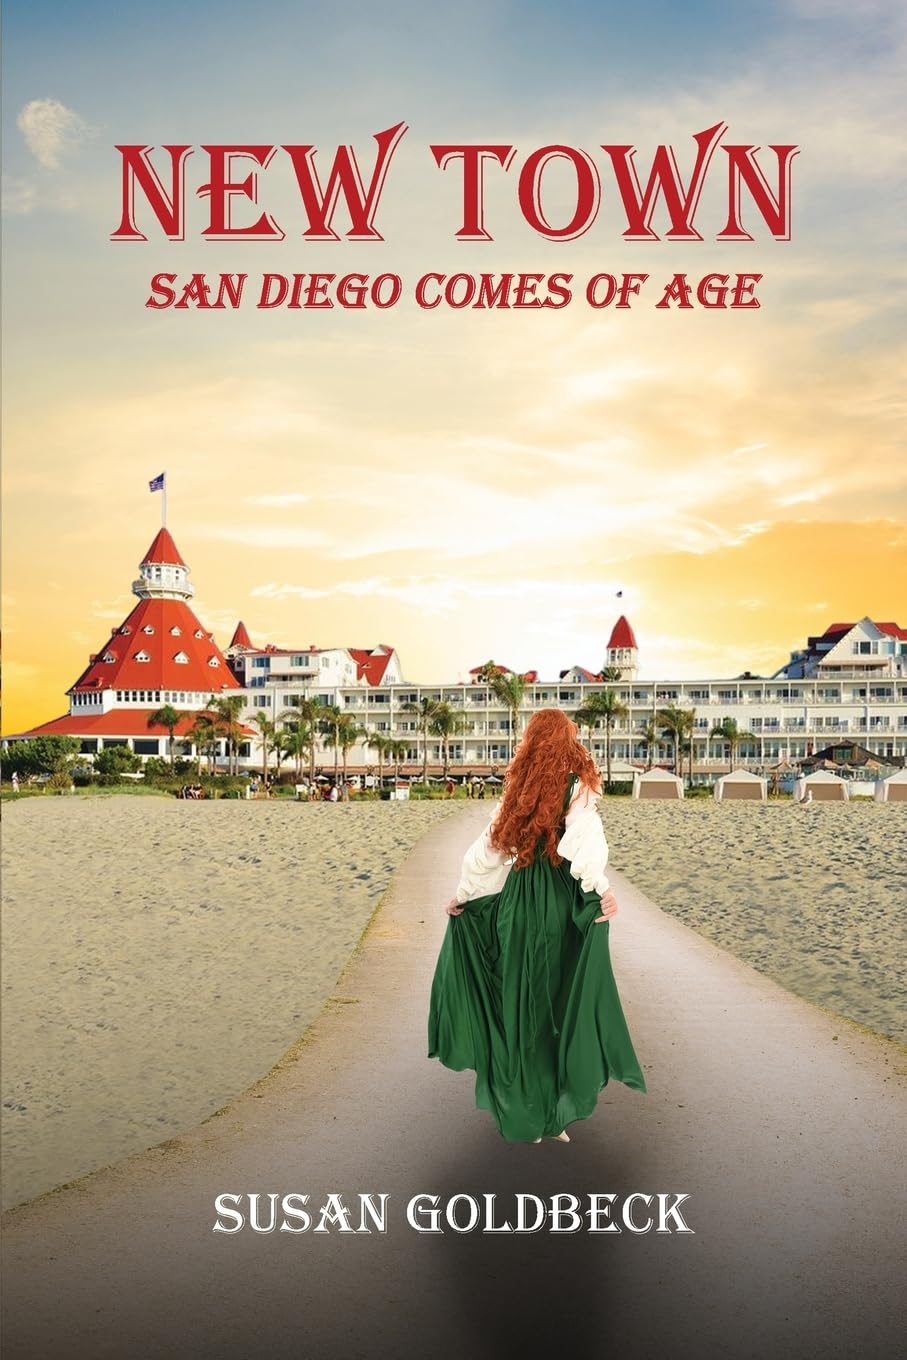 Cover of novel showing woman in front of Hotel Del Coronado